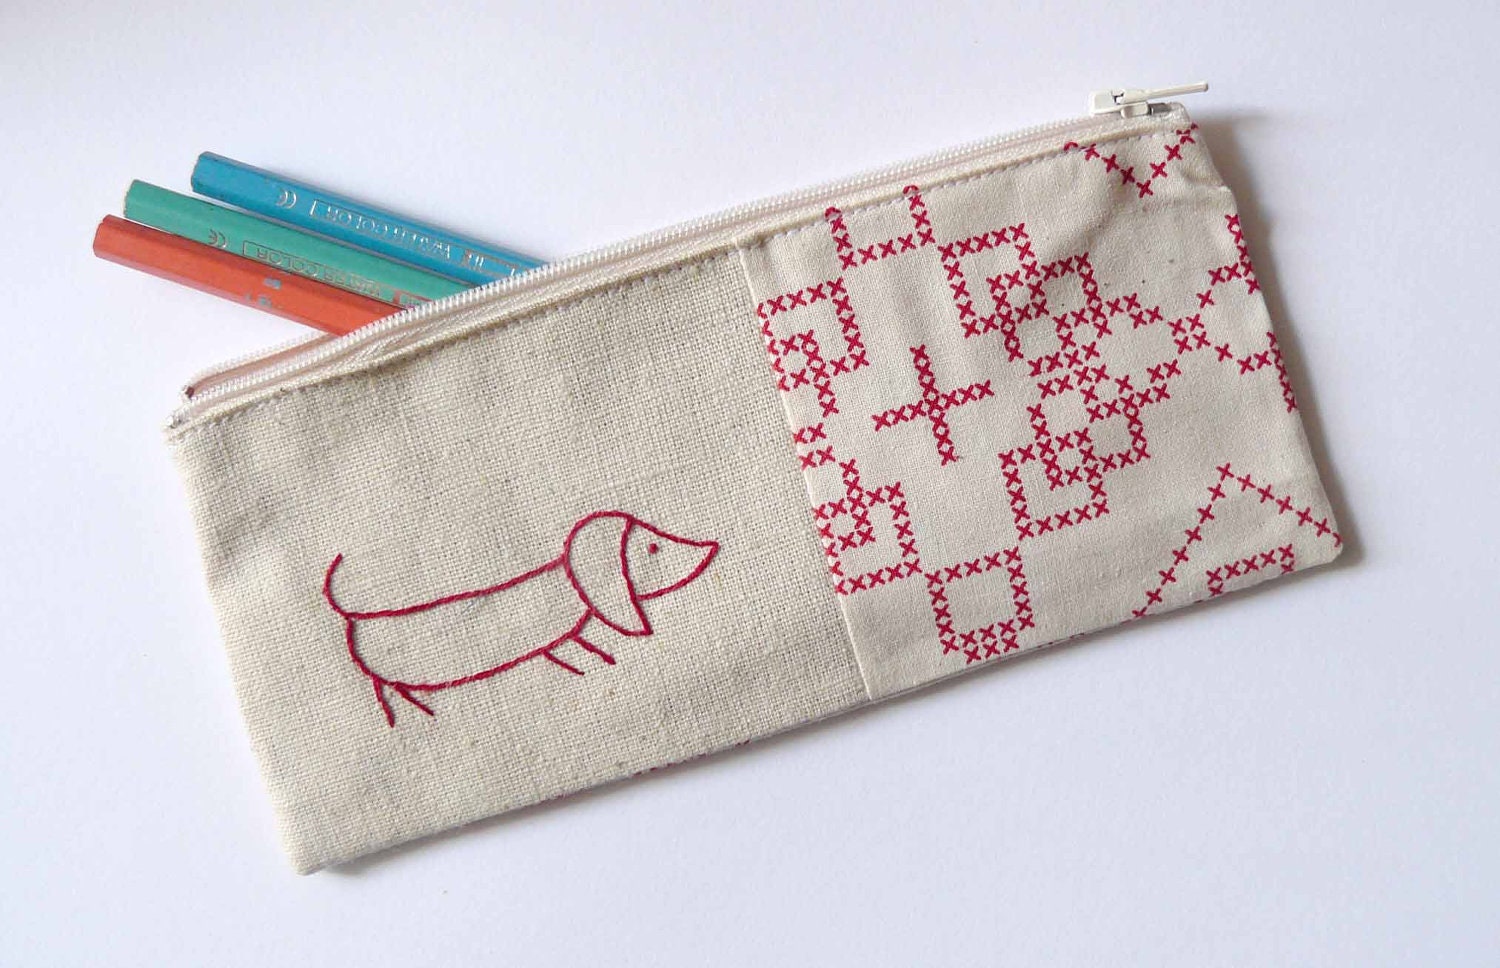 pencil case with red sausage dog embroidery. cross stitch patterned taupe fabric - edwardandlilly